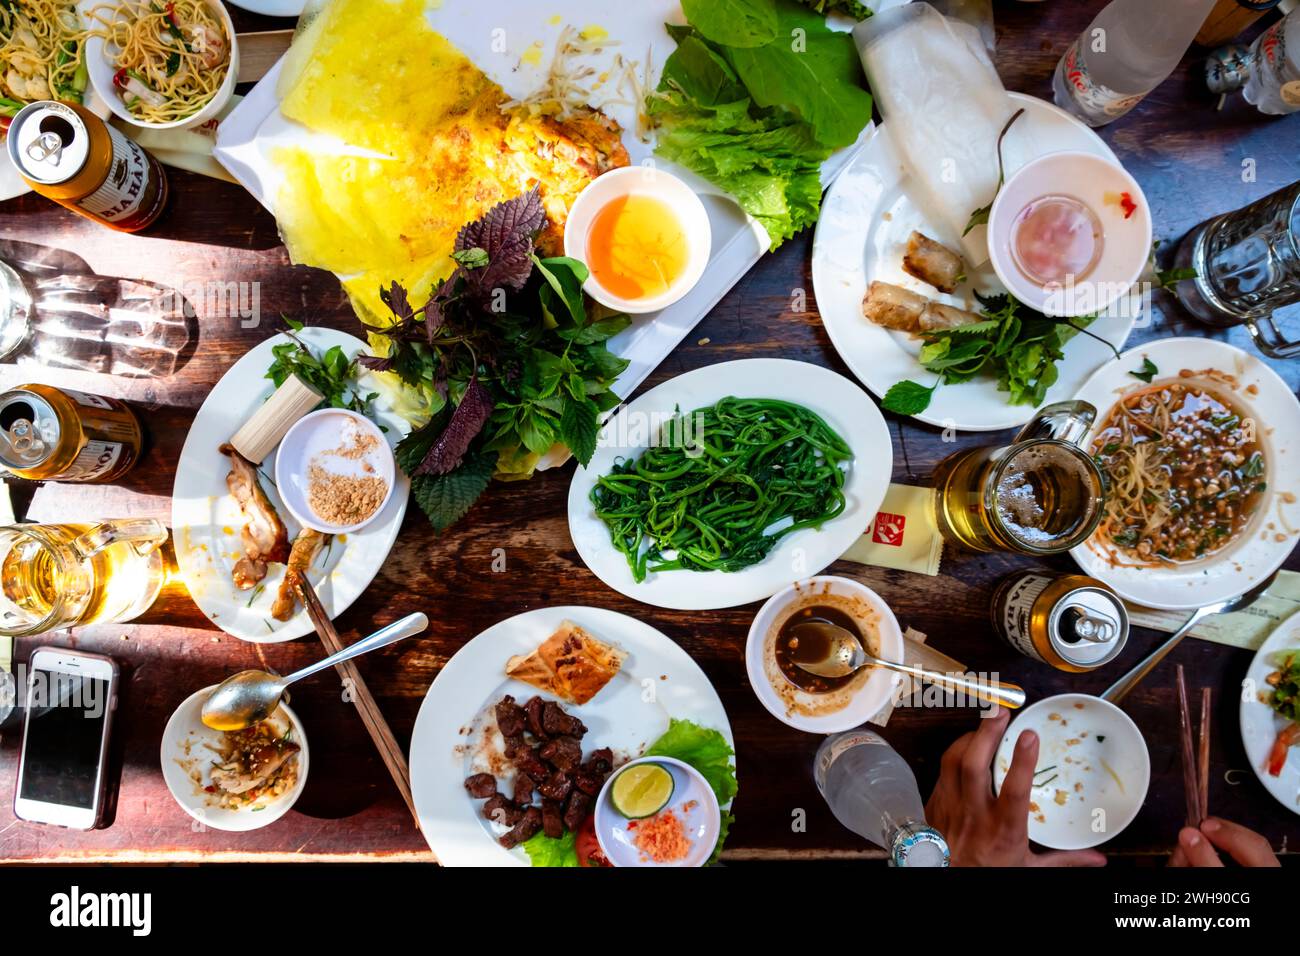 Flay lay photo of a variety of traditional Vietnamese food at a restaurant in Hanoi Stock Photo